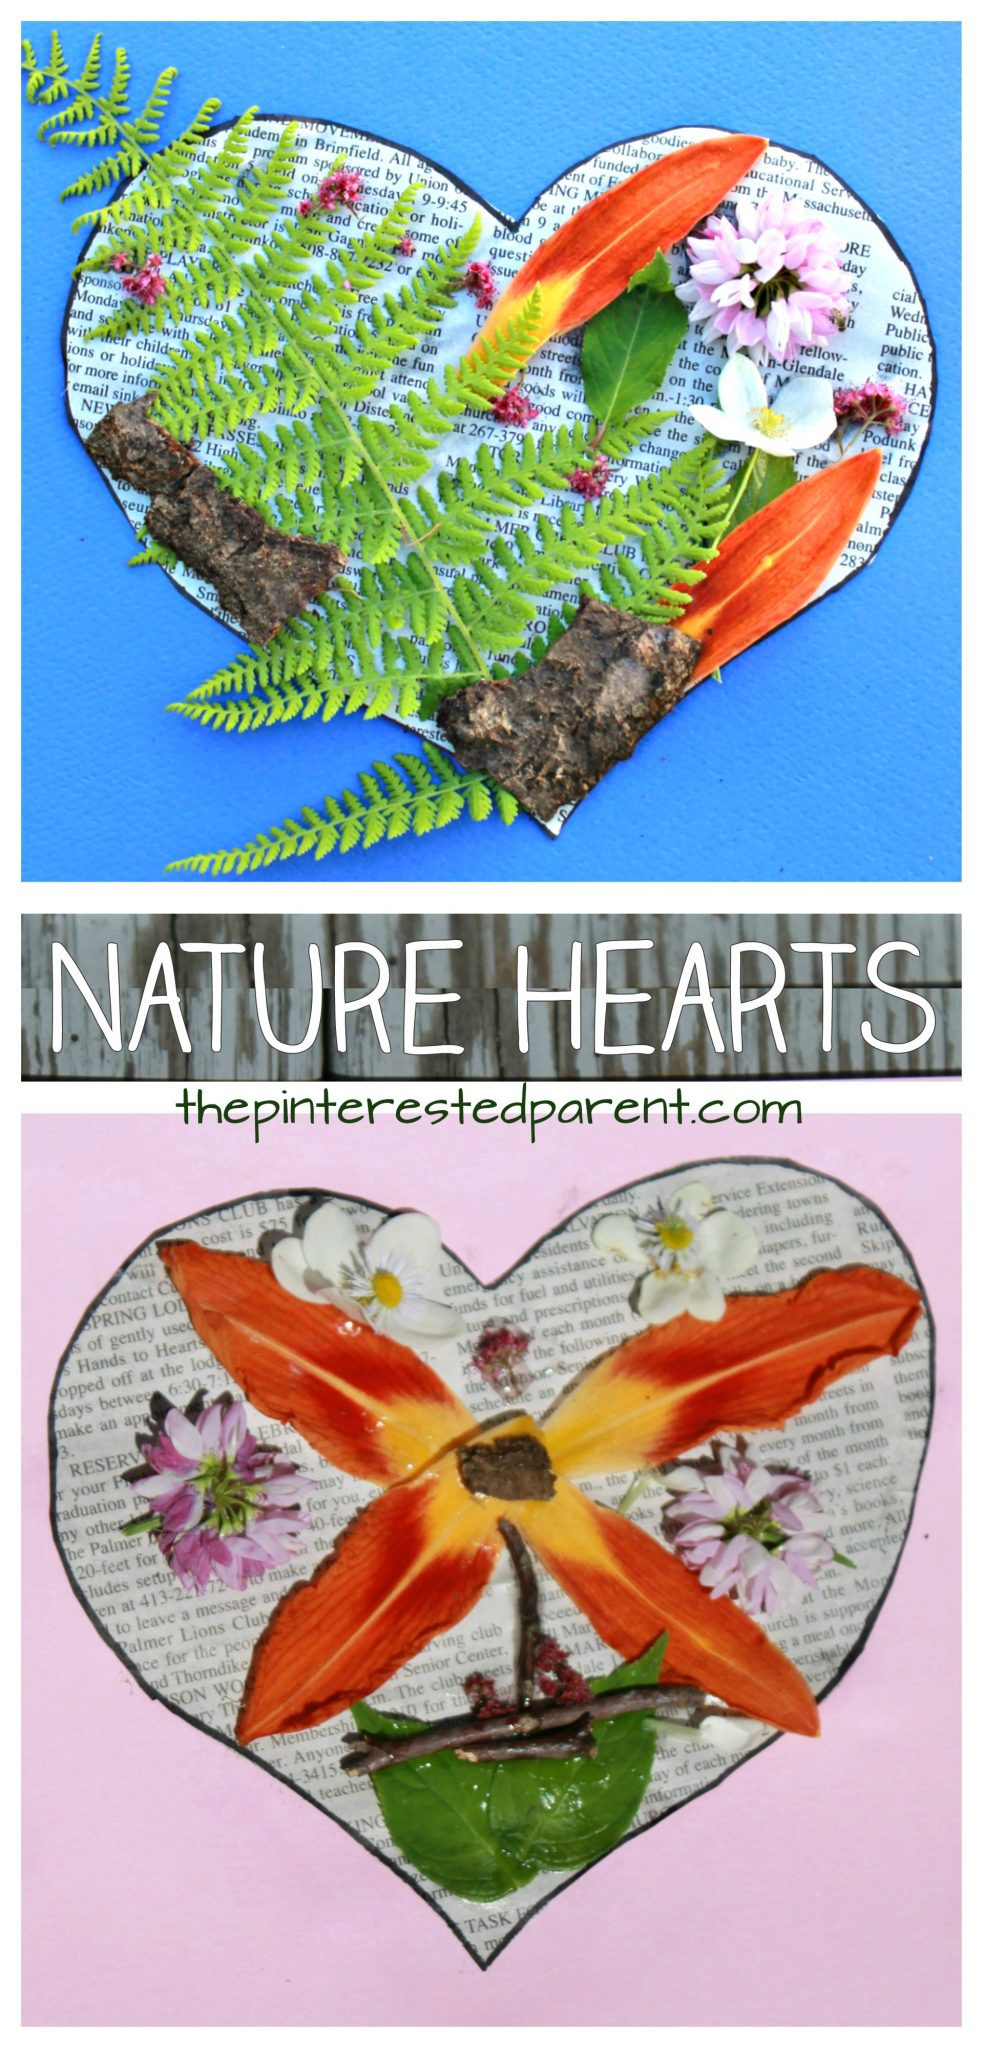 Summer Preschool Art Projects
 nature Archives – The Pinterested Parent